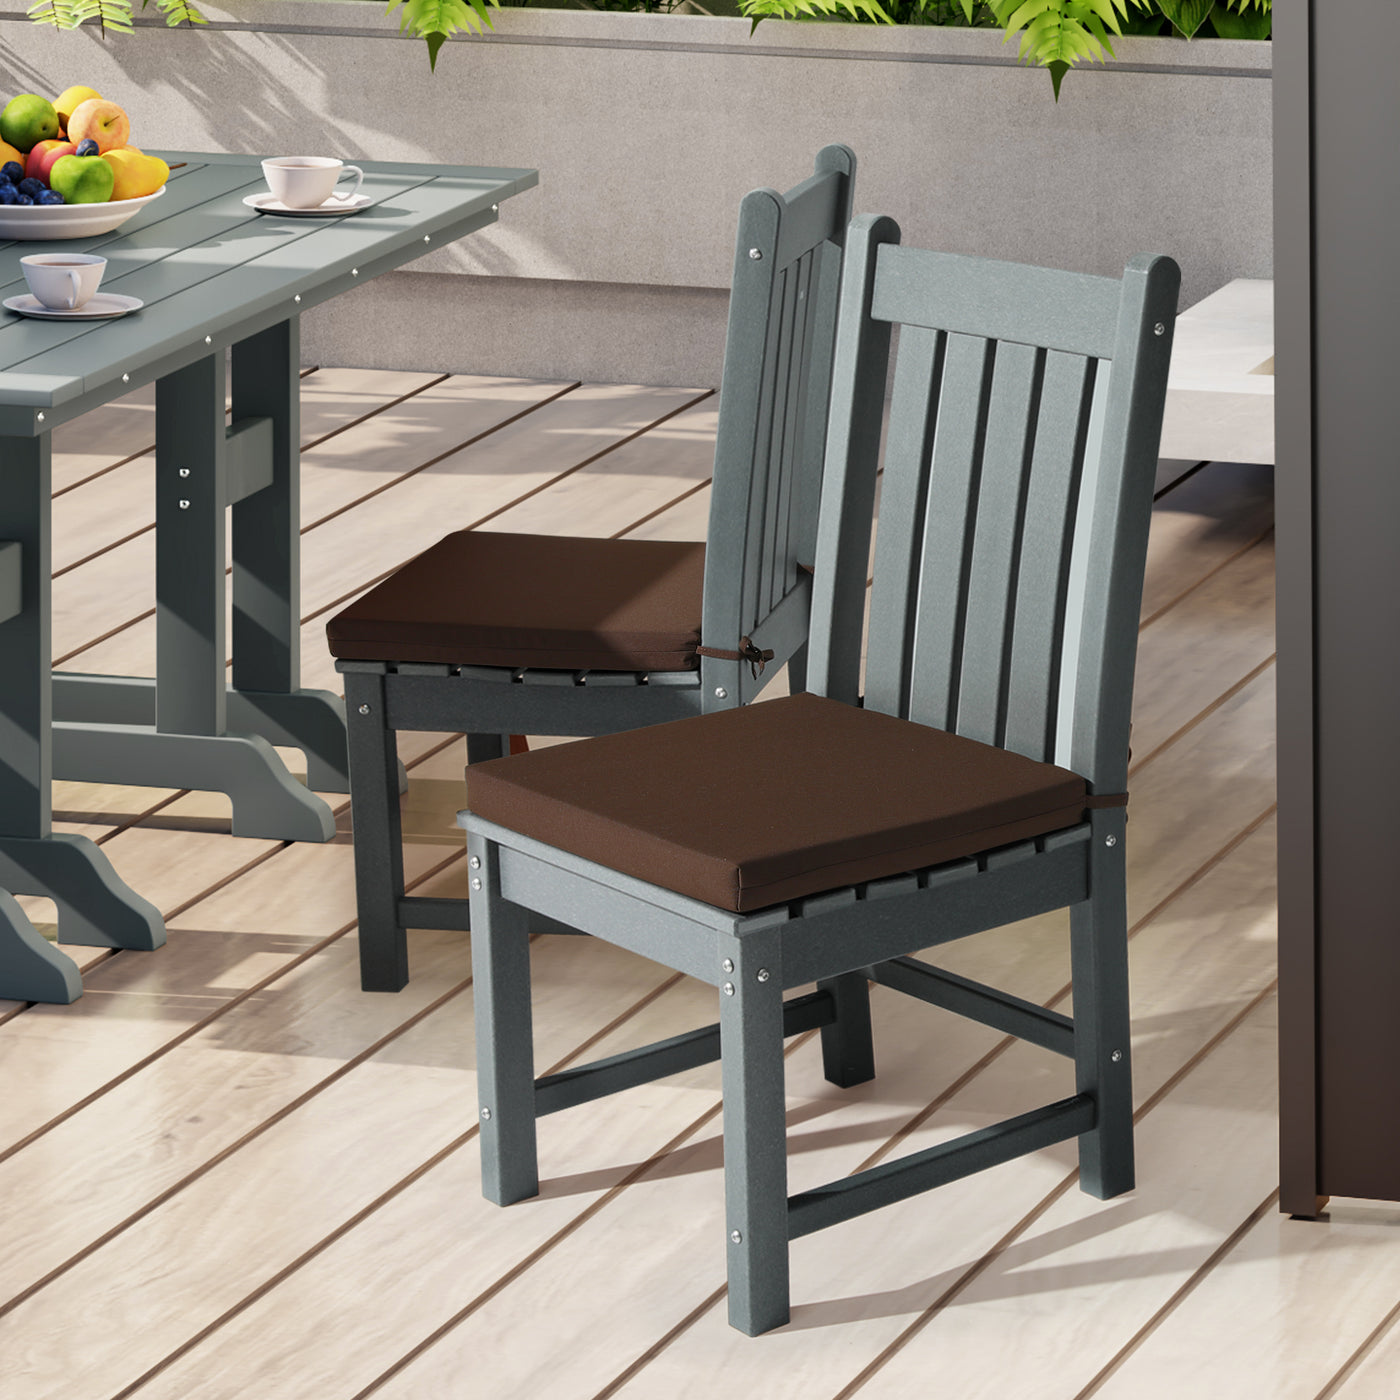 Solace Outdoor Patio Kitchen Dining Chair Seat Cushions (Set of 4)